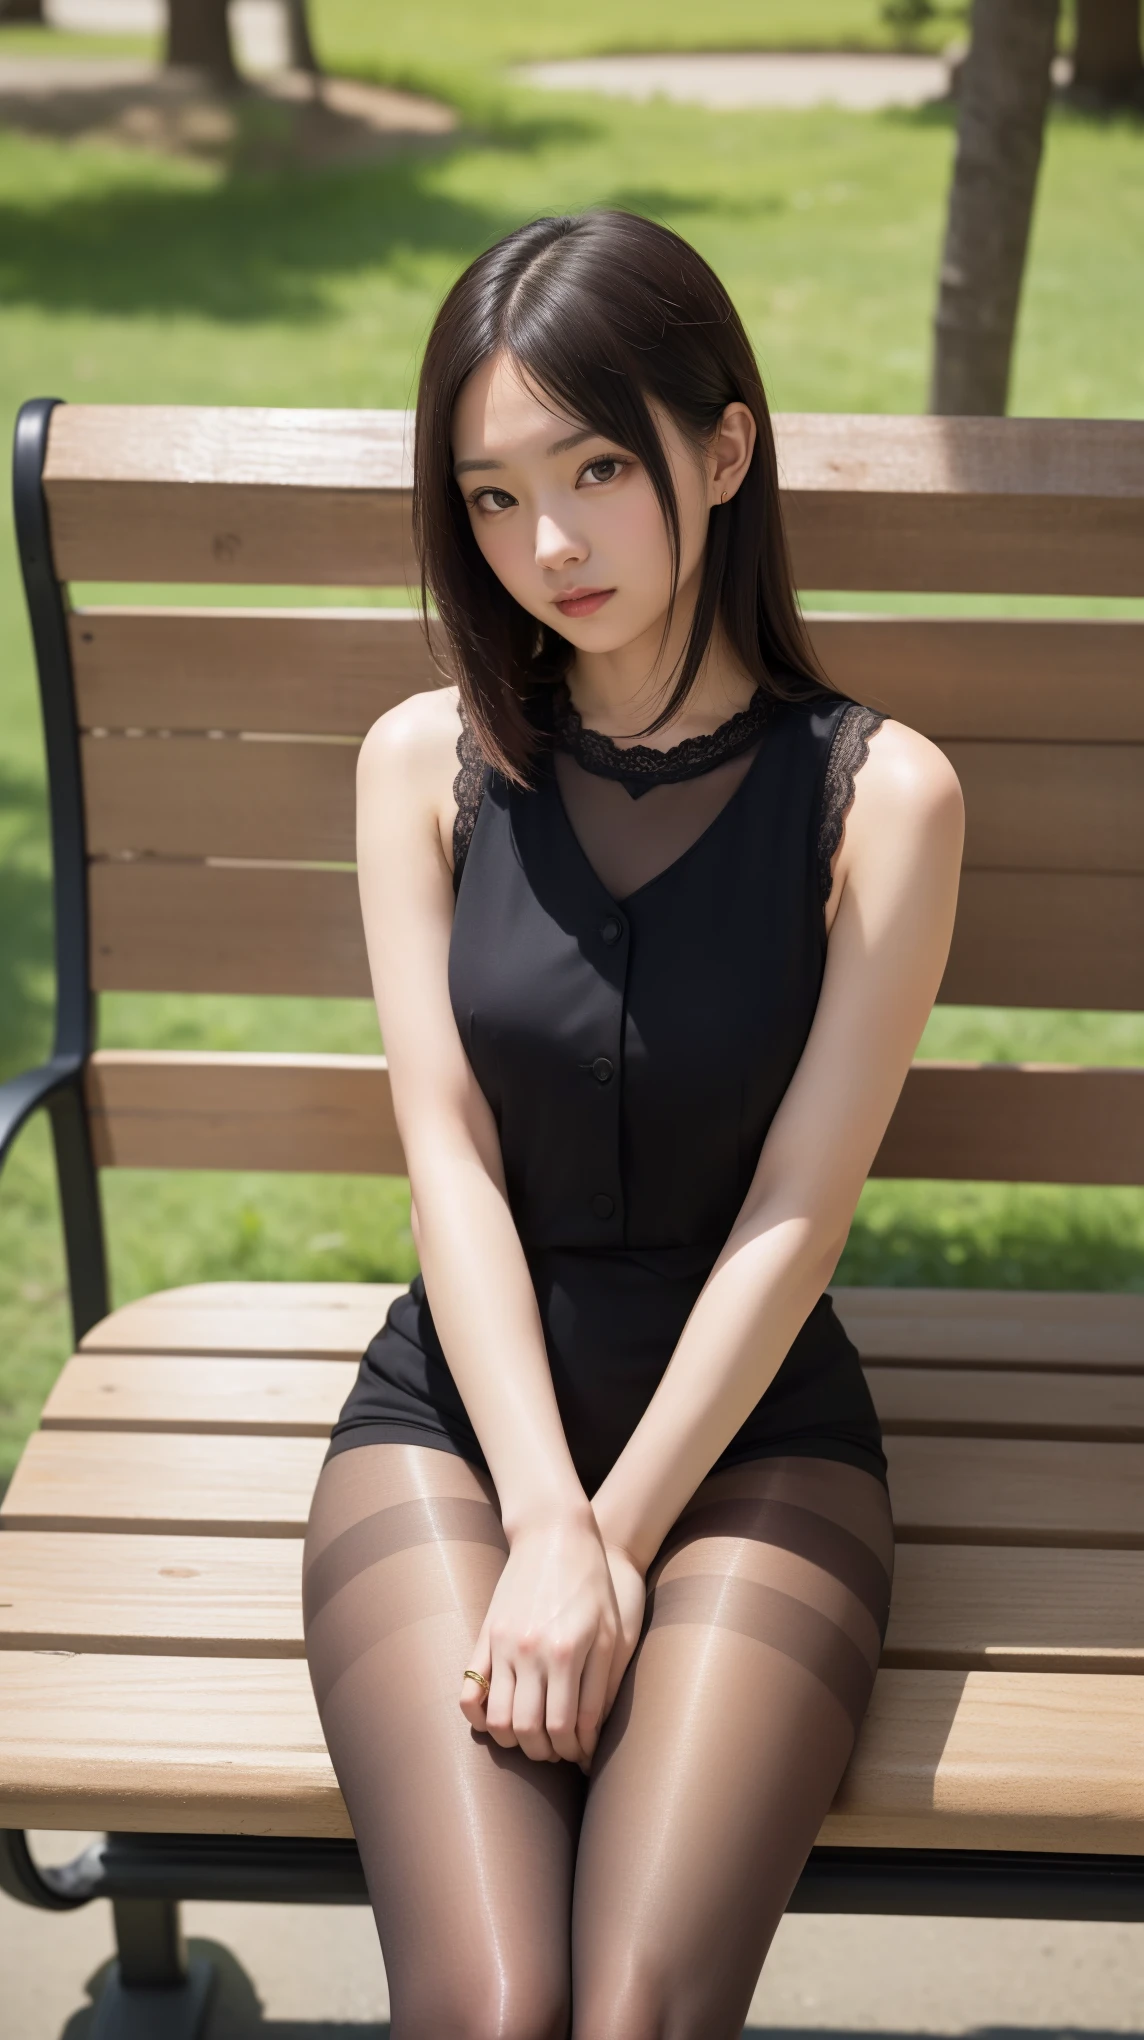 ulzzang-6500-v1.1, (RAW photo:1.2), (Photoreal), (muste piece), (genuine:1.4), １girl、perfect anatomy、48 years old、look at the camera、medium long hair、plaid vest、((sitting on the bench:1.3))、(Super realistic black sheer pantyhose:1.2), (high heels)、(business services)、